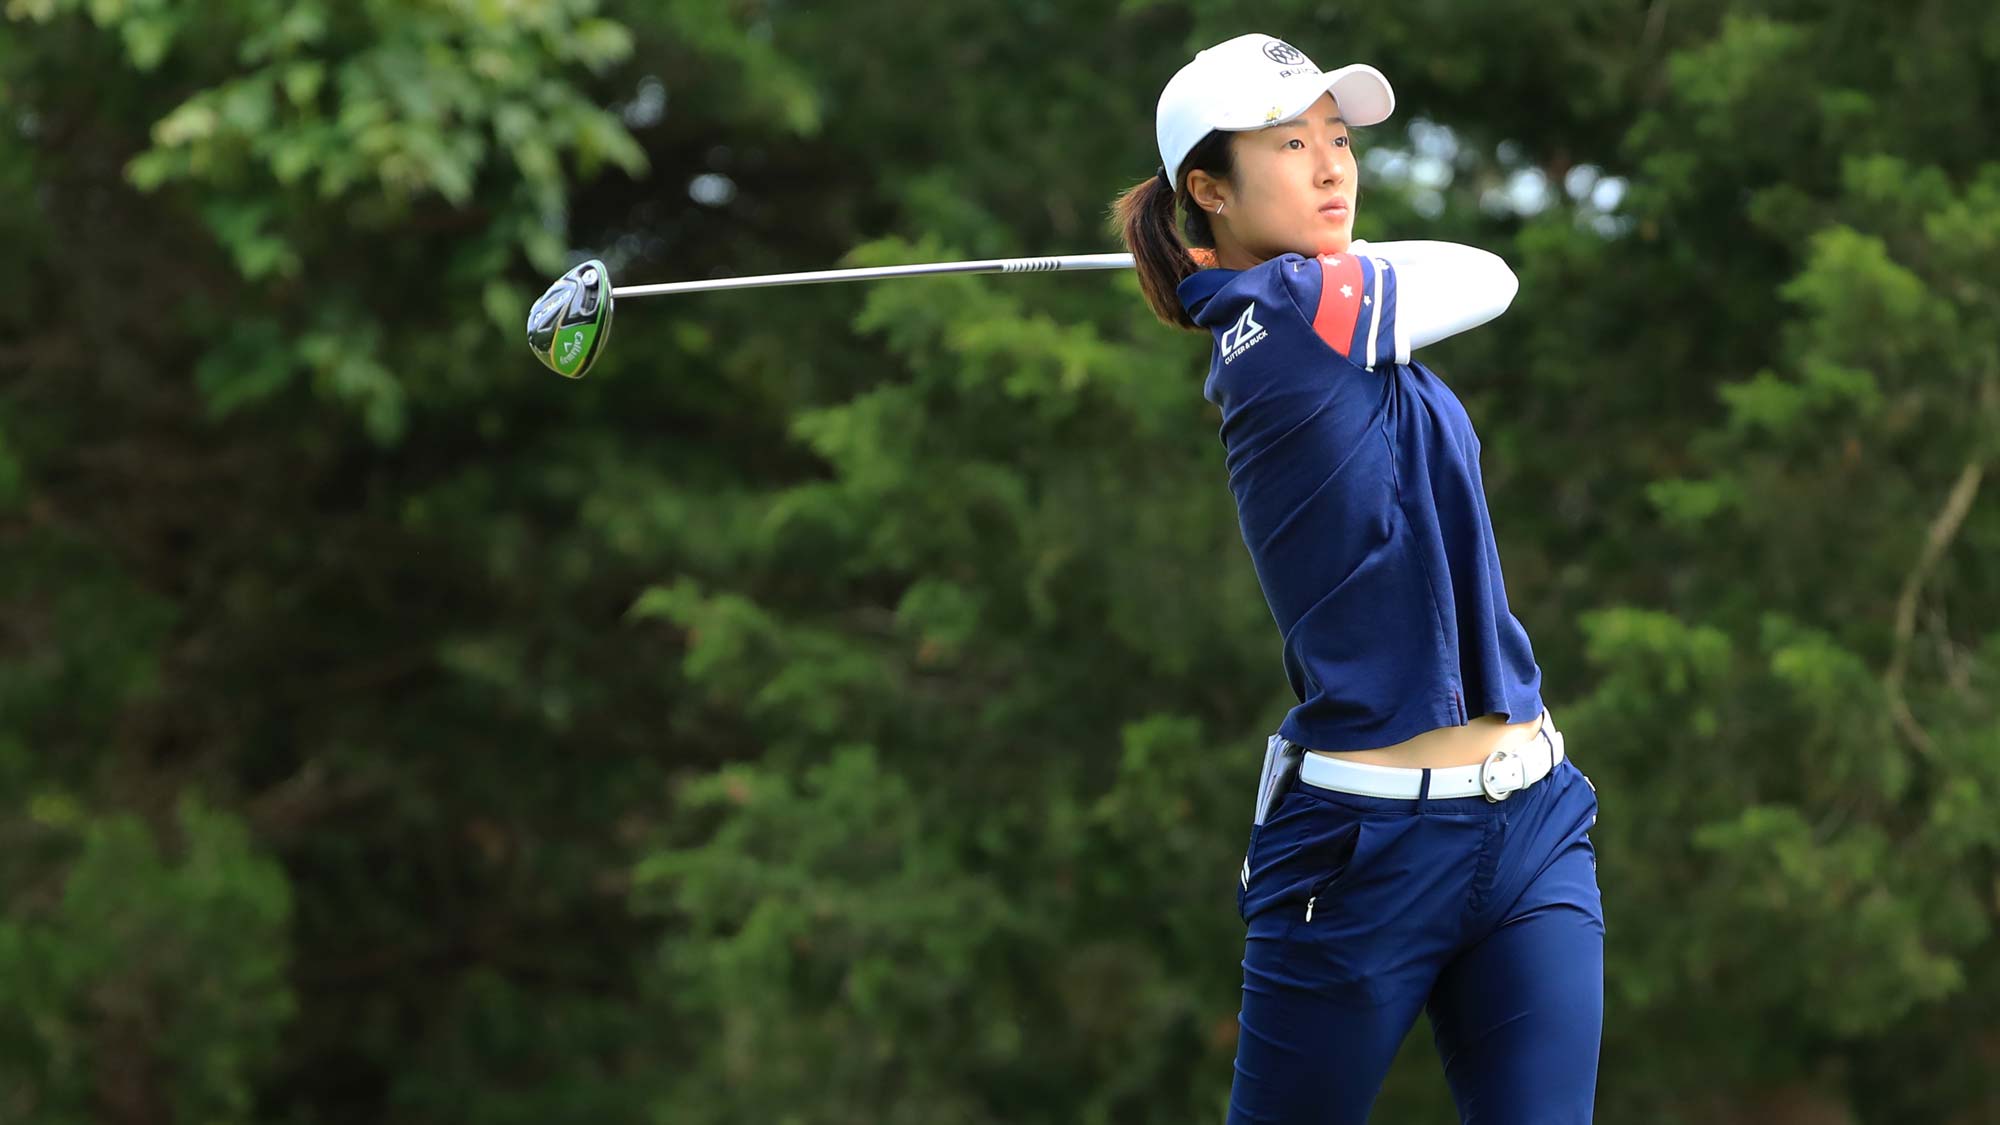 Yu Liu of China hits her tee shot on the 16th hole during the second round of the ShopRite LPGA Classic presented by Acer